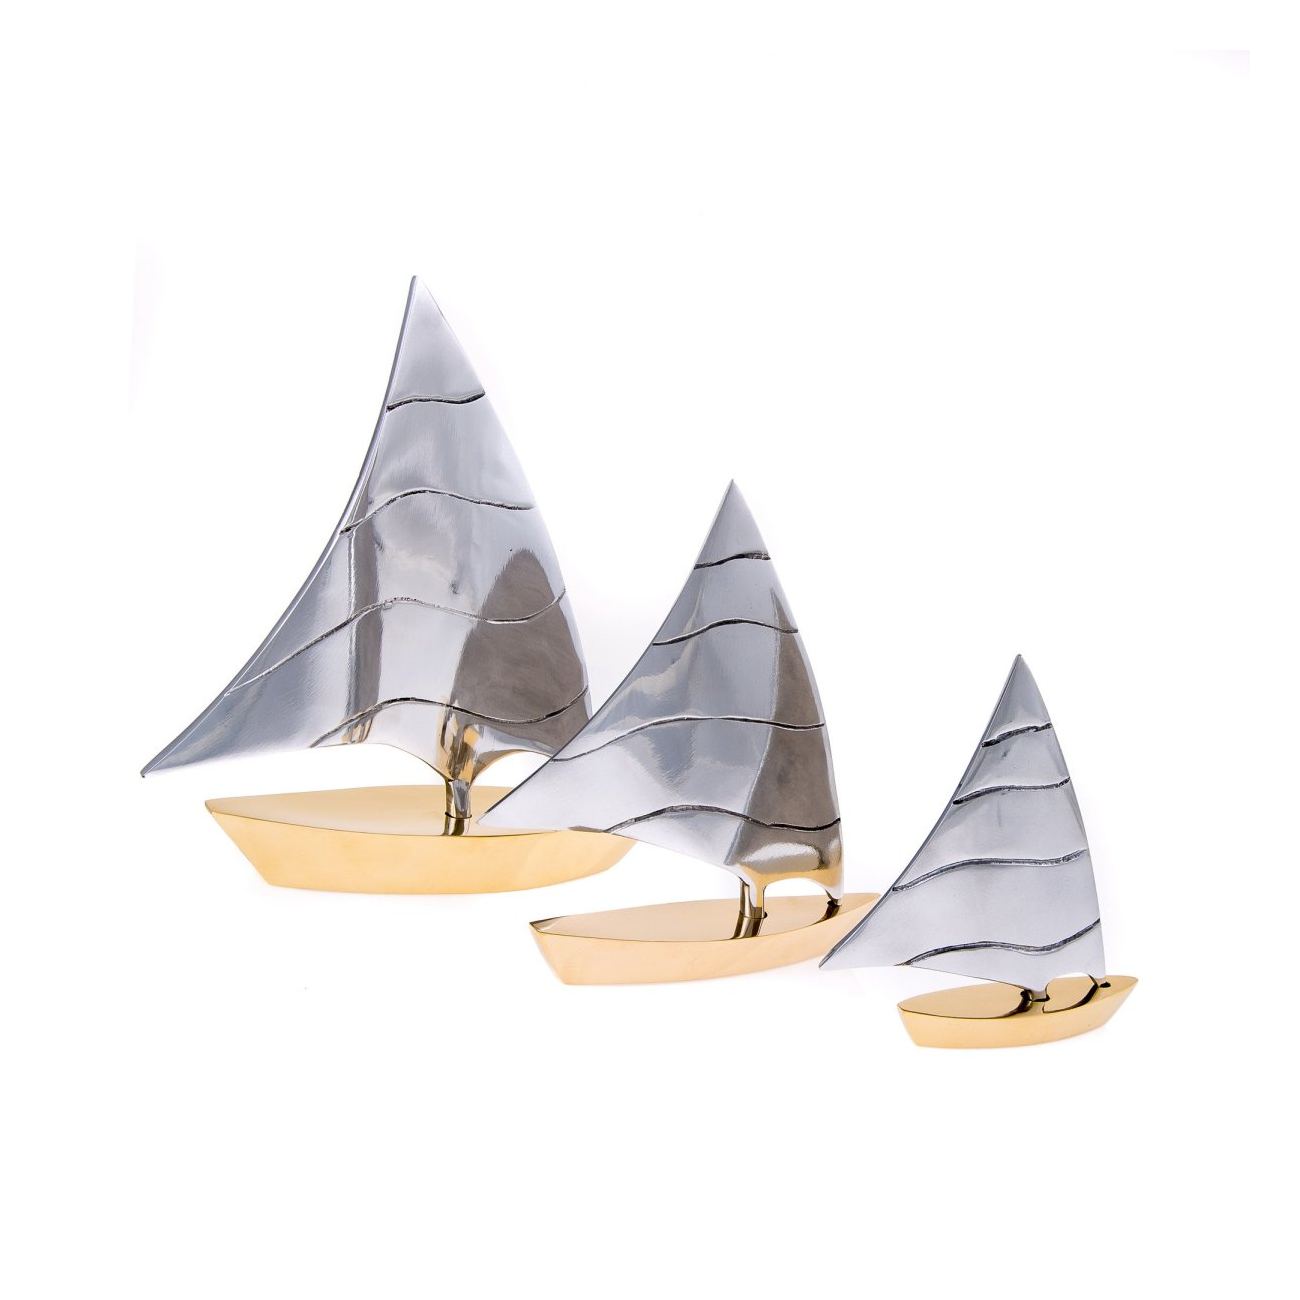 Distressed Boat Nautical Ornament with Cream & Blue Striped Sail 5020 